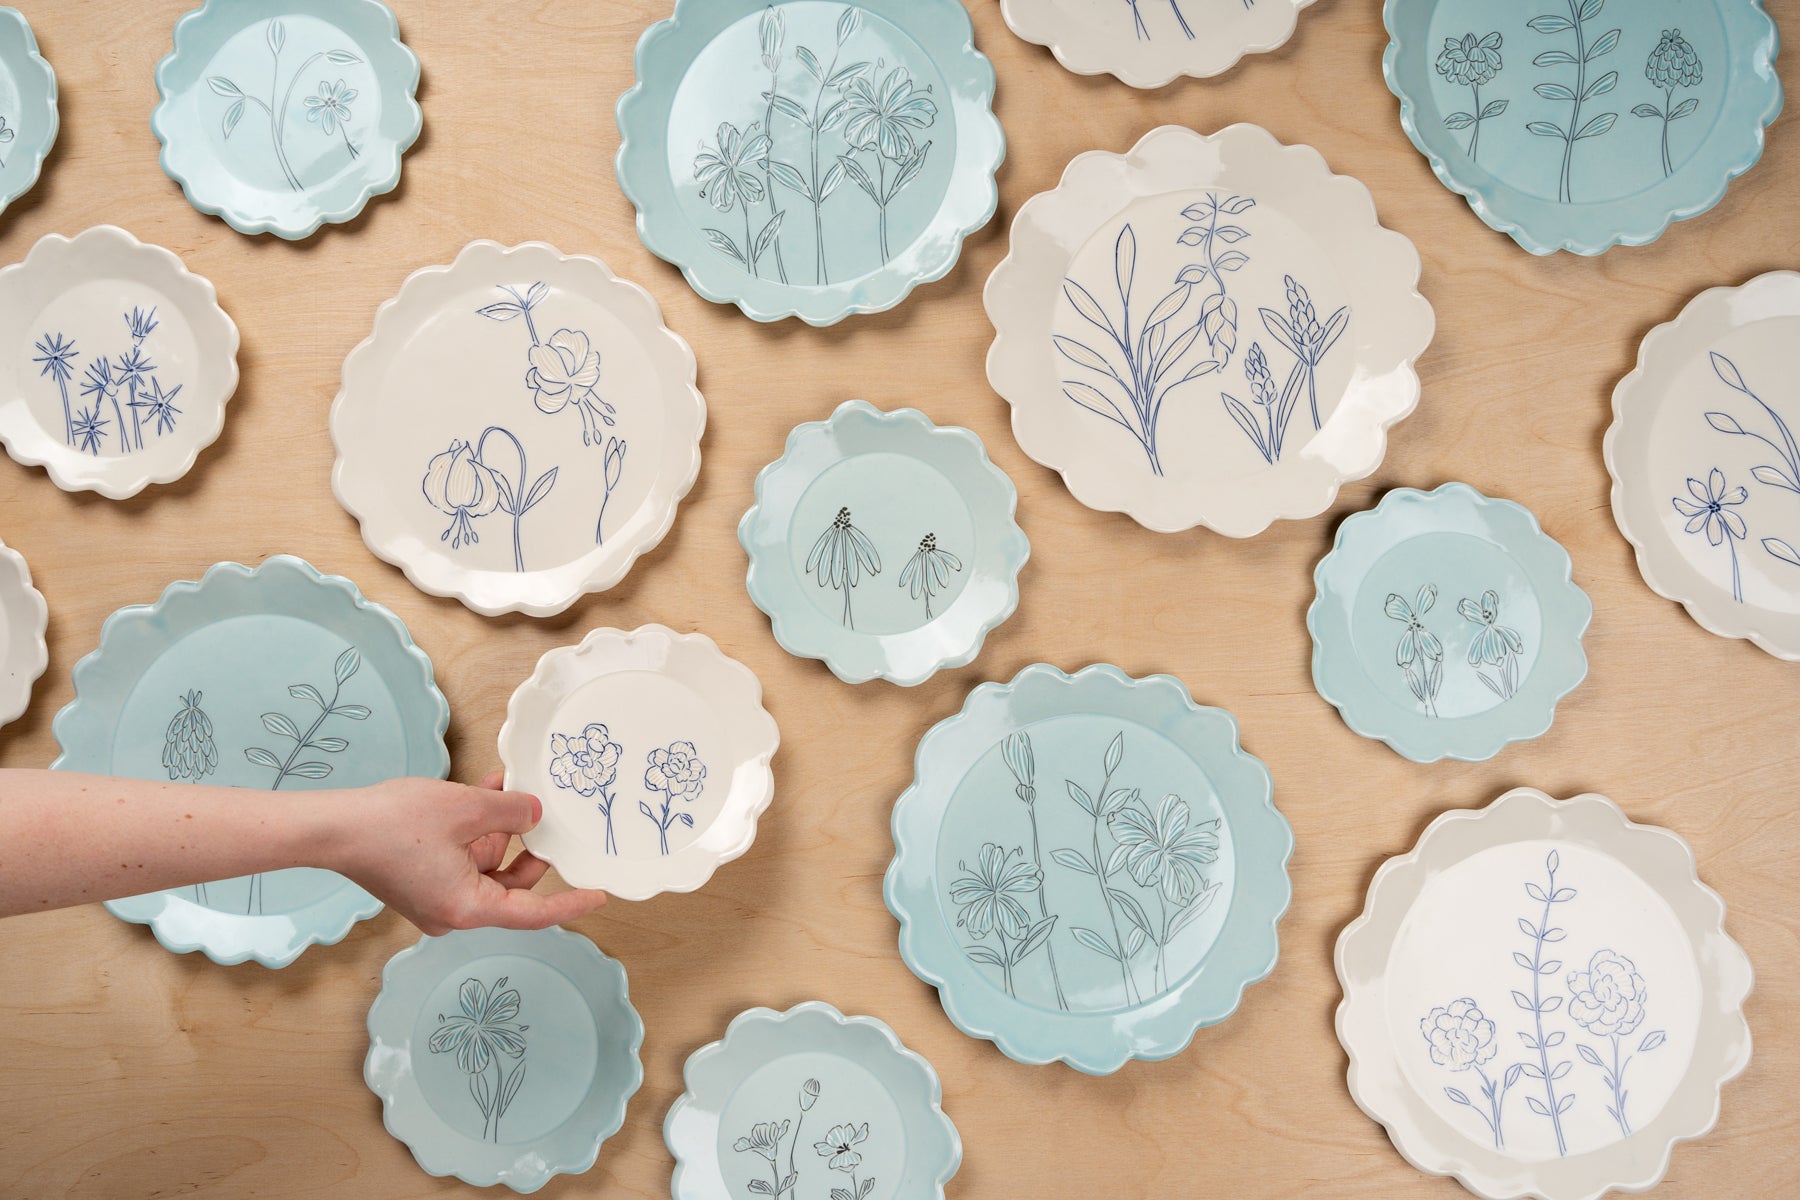 A field of white and blue floral scalloped porcelain plates by potter Julie Wiggins. A hand reaches into the frame to set down a small plate. Image by Loam.